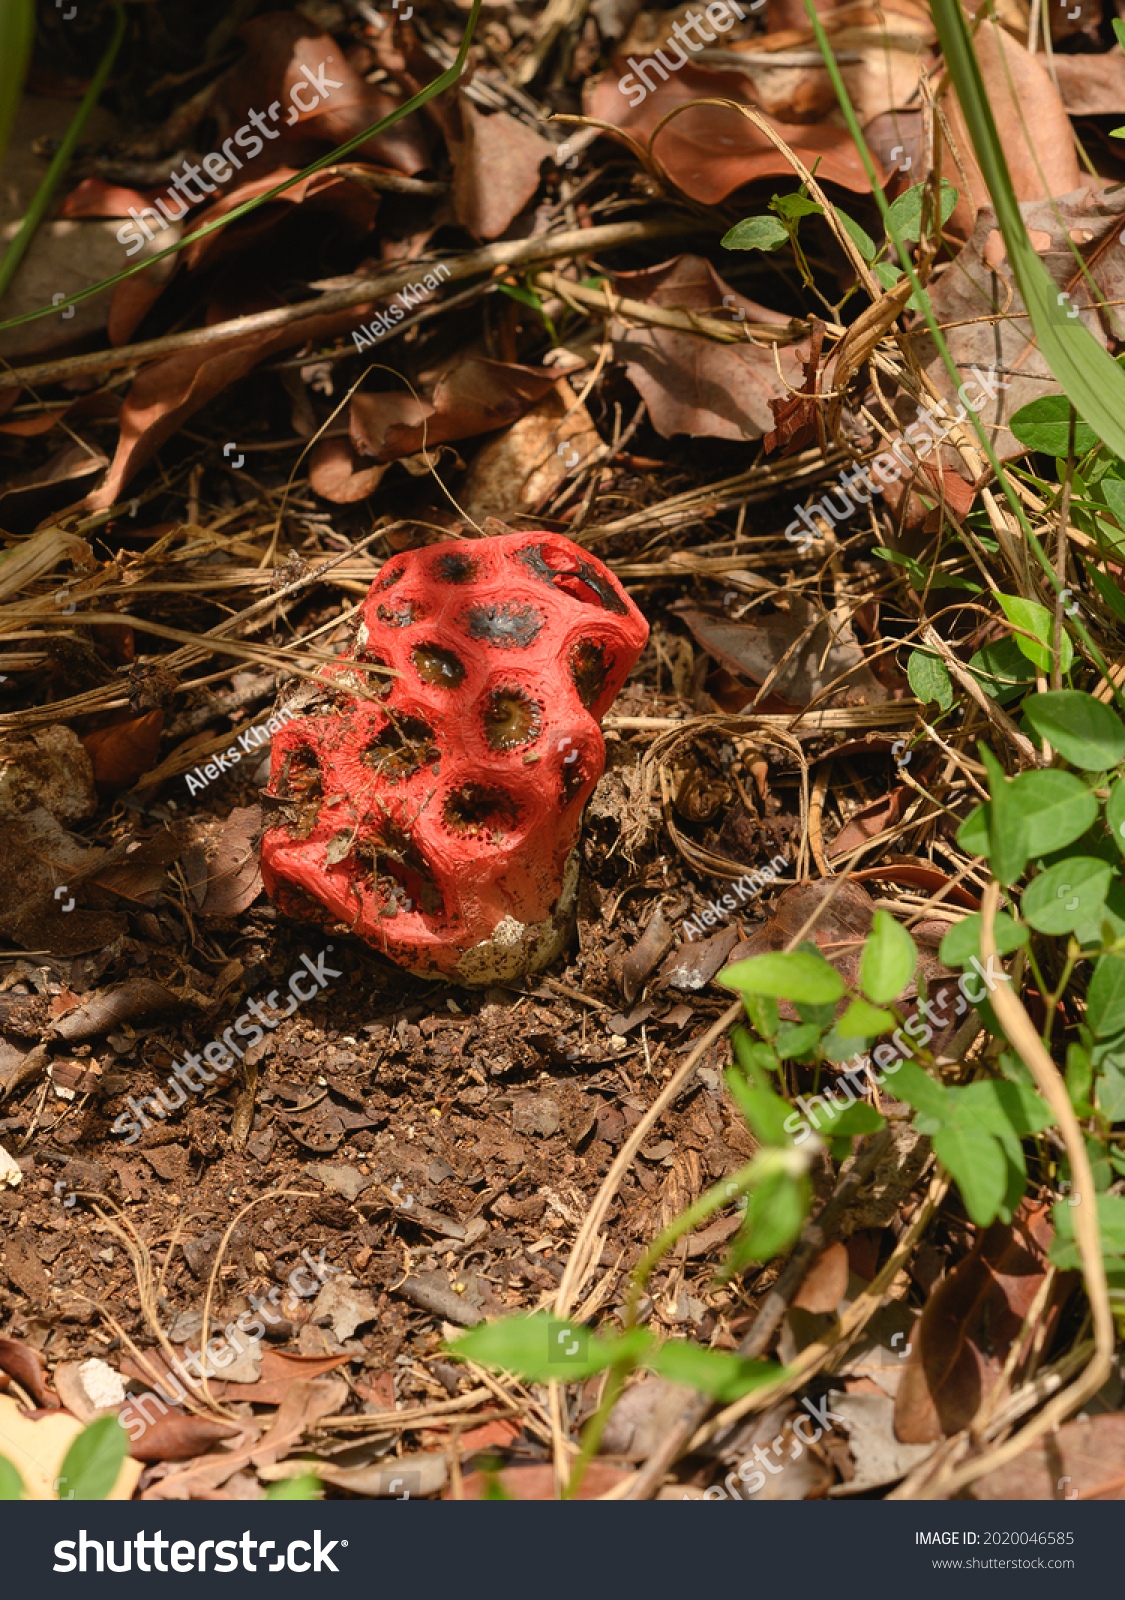 Photo shows a red poisonous mushroom. Clathrus ruber belongs to Basidiomycete fungi. Mushroom grows in jungle. In foreground there is a non-edible mushroom, and background is fallen leaves. #2020046585